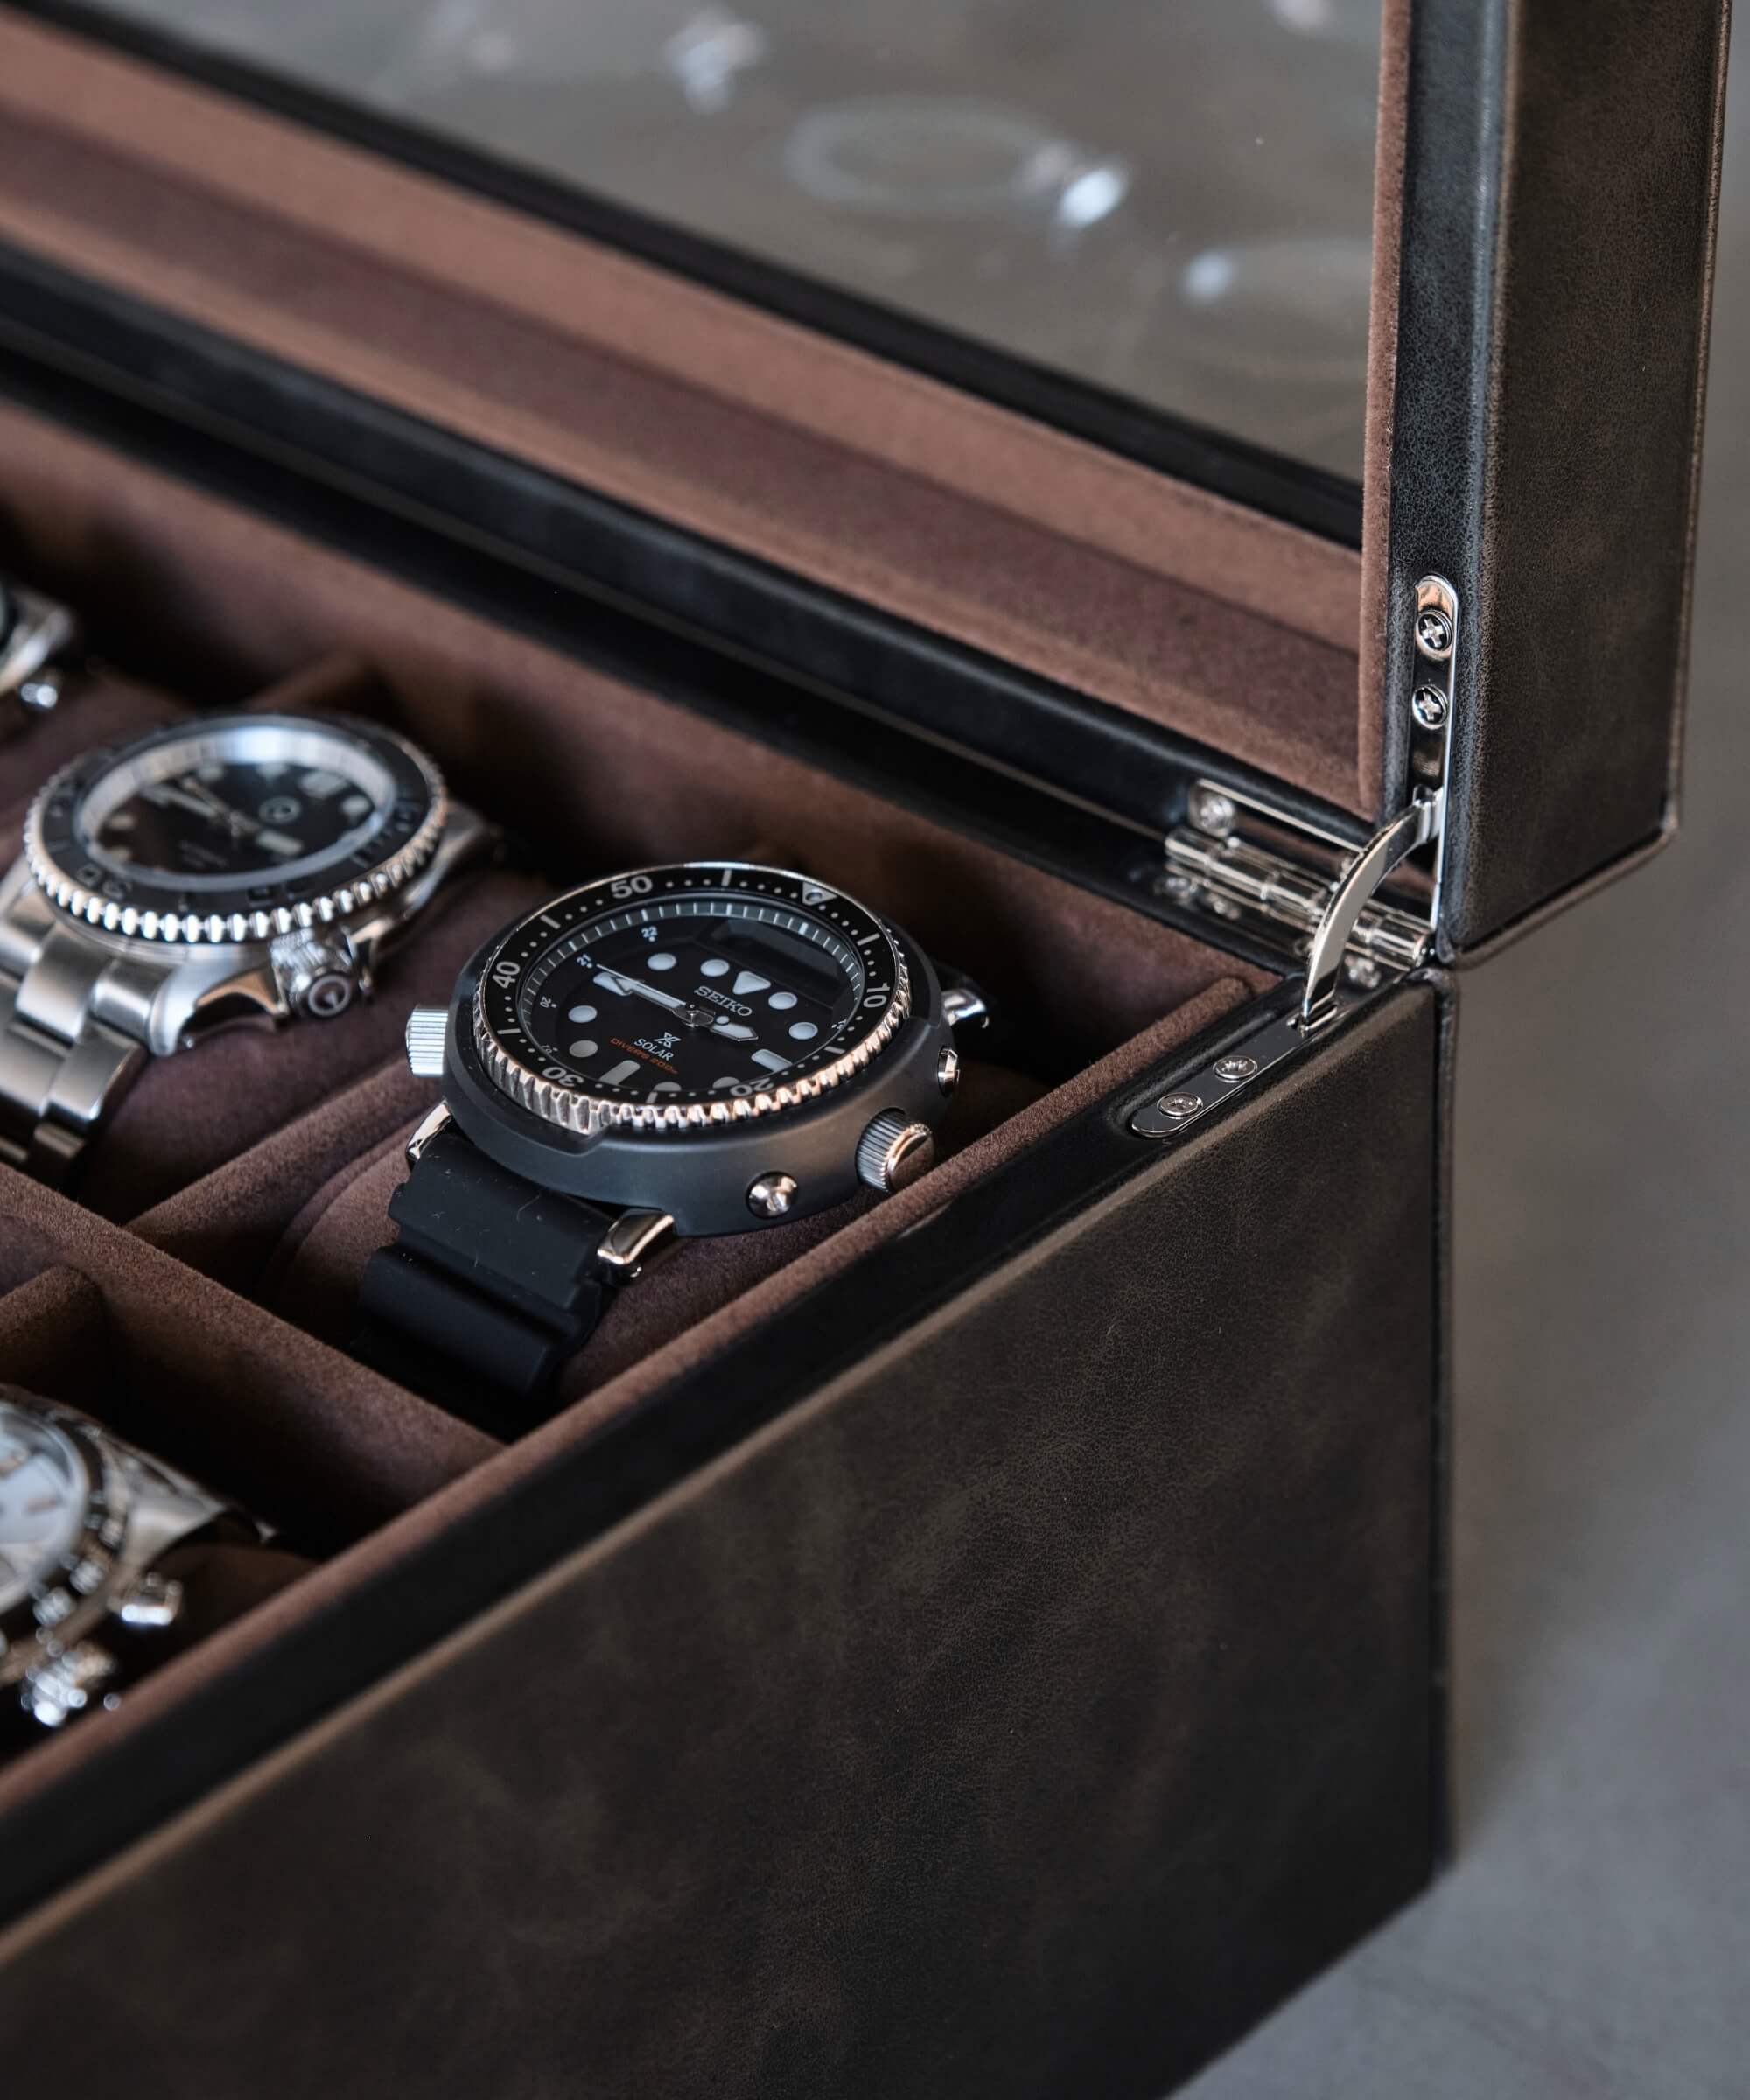 A TAWBURY Bayswater 12 Slot Watch Box with Drawer - Black filled with an assortment of timepieces.